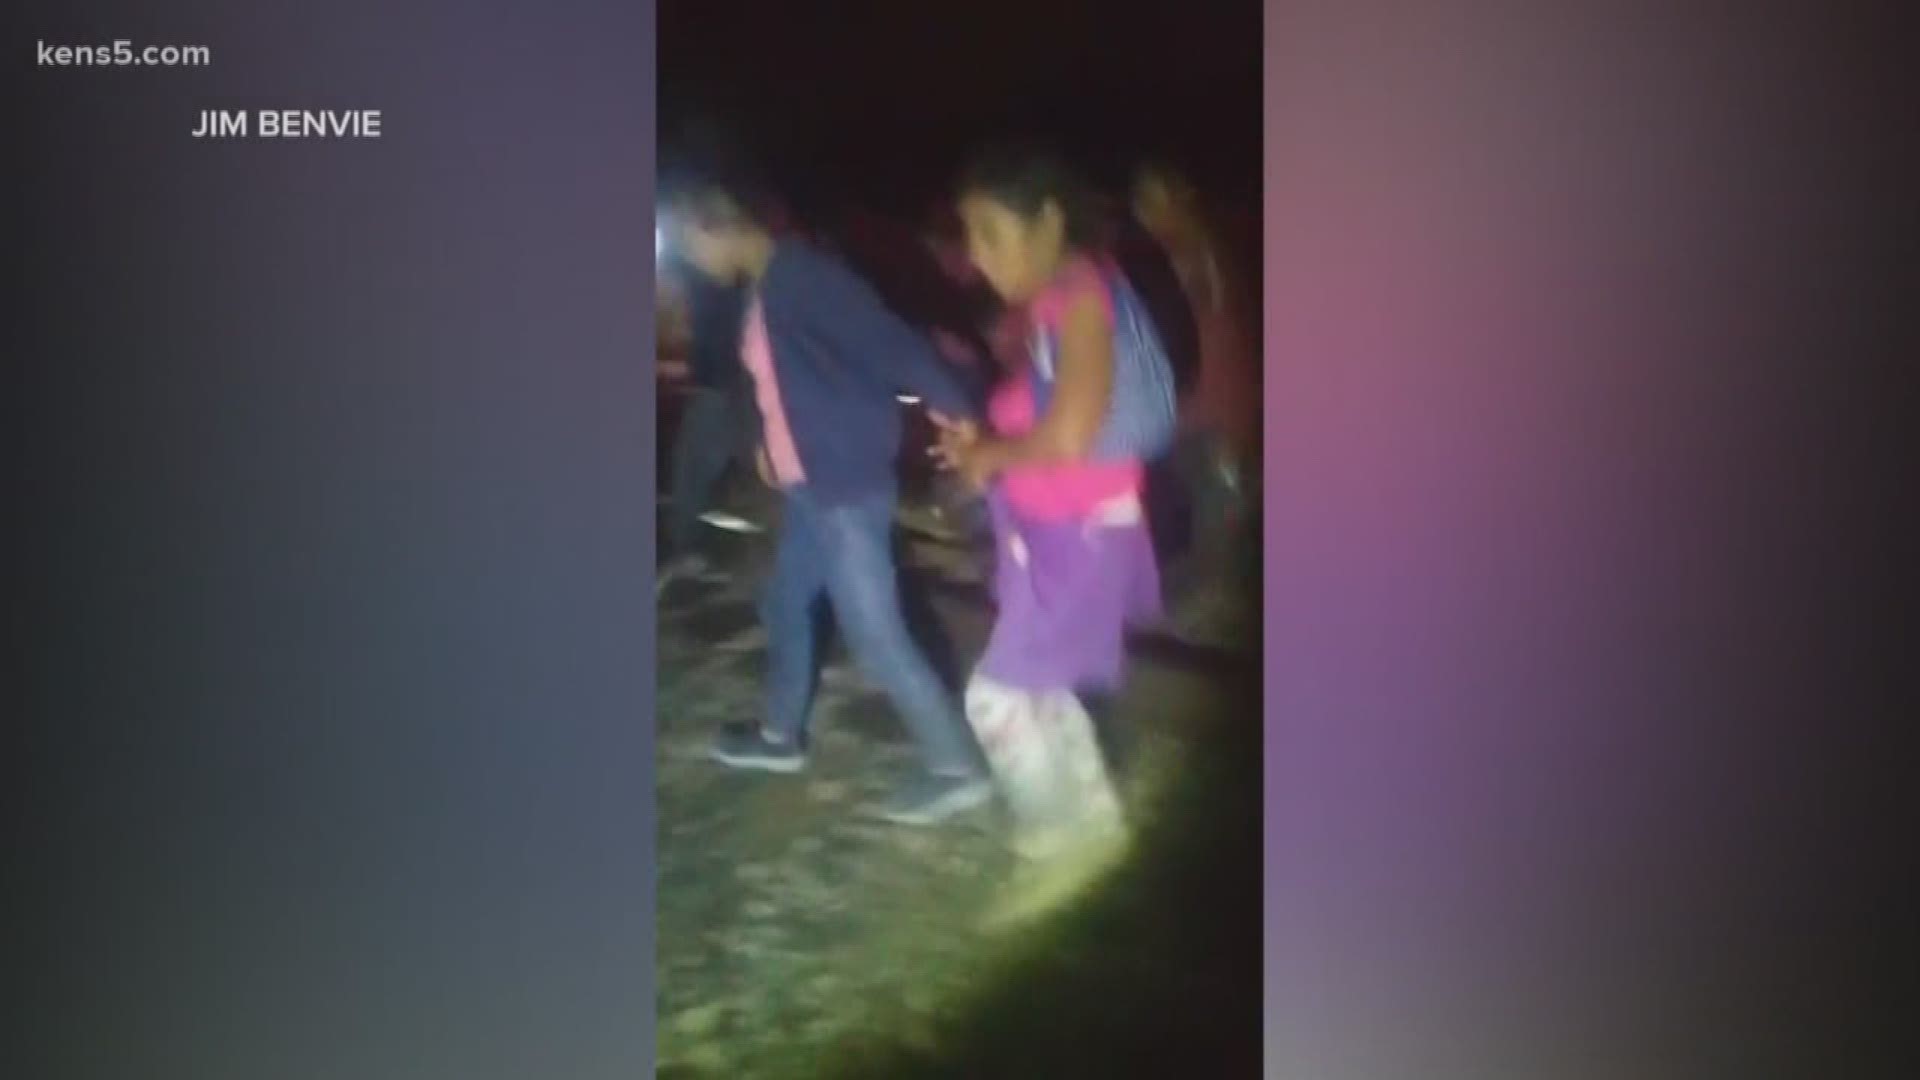 Hundreds of migrants were captured on camera walking in the middle of the night across the New Mexico-Chihuahua border. The video was taken by Jim Benvie, a member of a volunteer group called United Constitutional Patriots. The group has been camping out in the Chihuahua desert for two months.